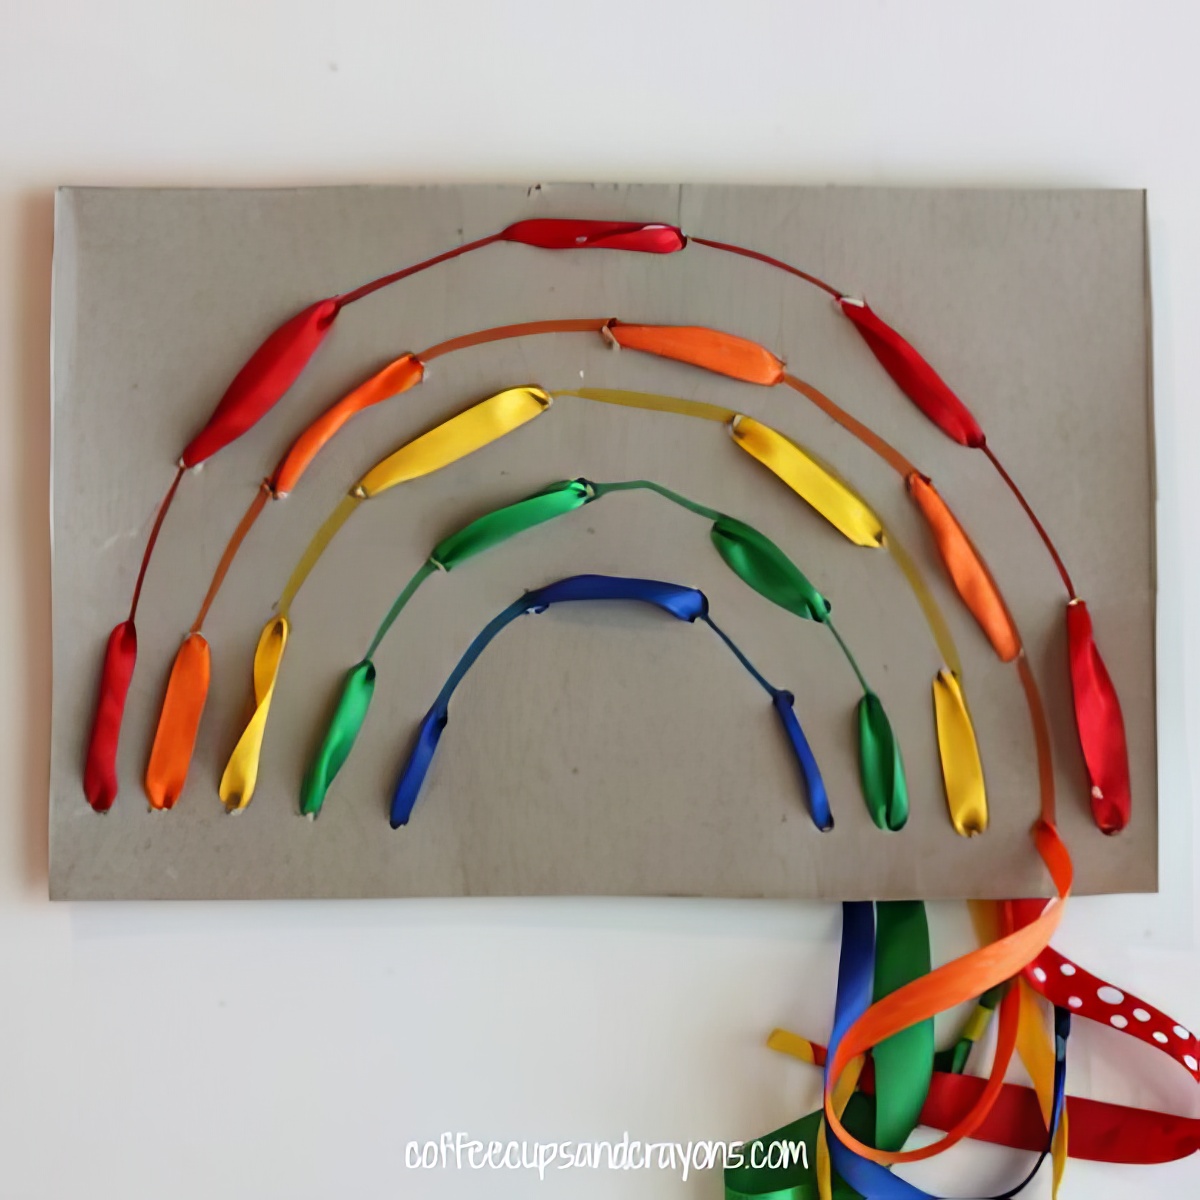 Rainbow-Lacing-Busy-Bag-A-colorful-way-to-develop-fine-motor-skills.-